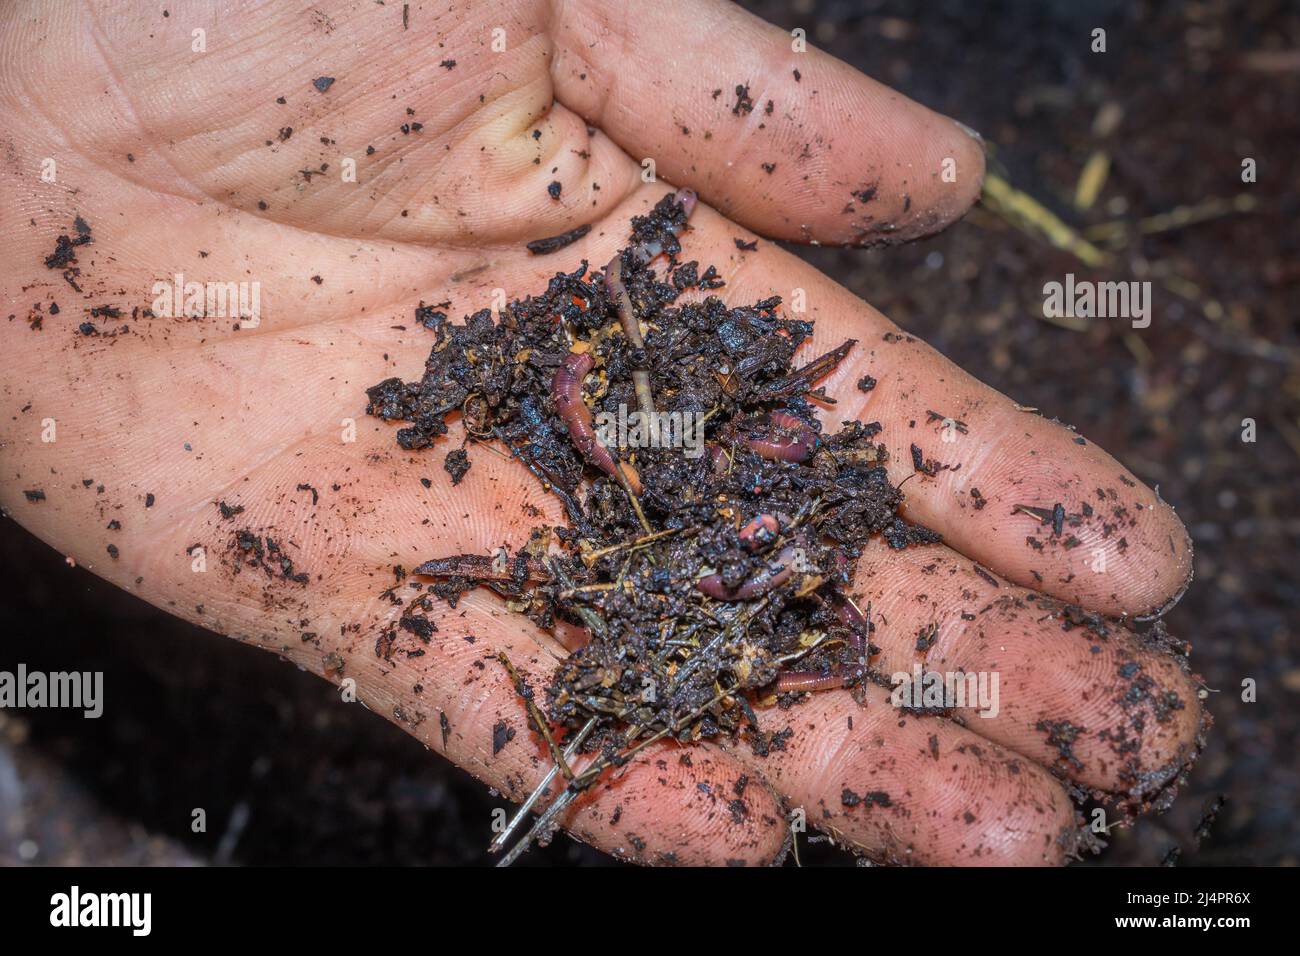 Man holding compost soil and red wiggler worms (Eisenia fetida) in his hands, Cape Town, South Africa Stock Photo